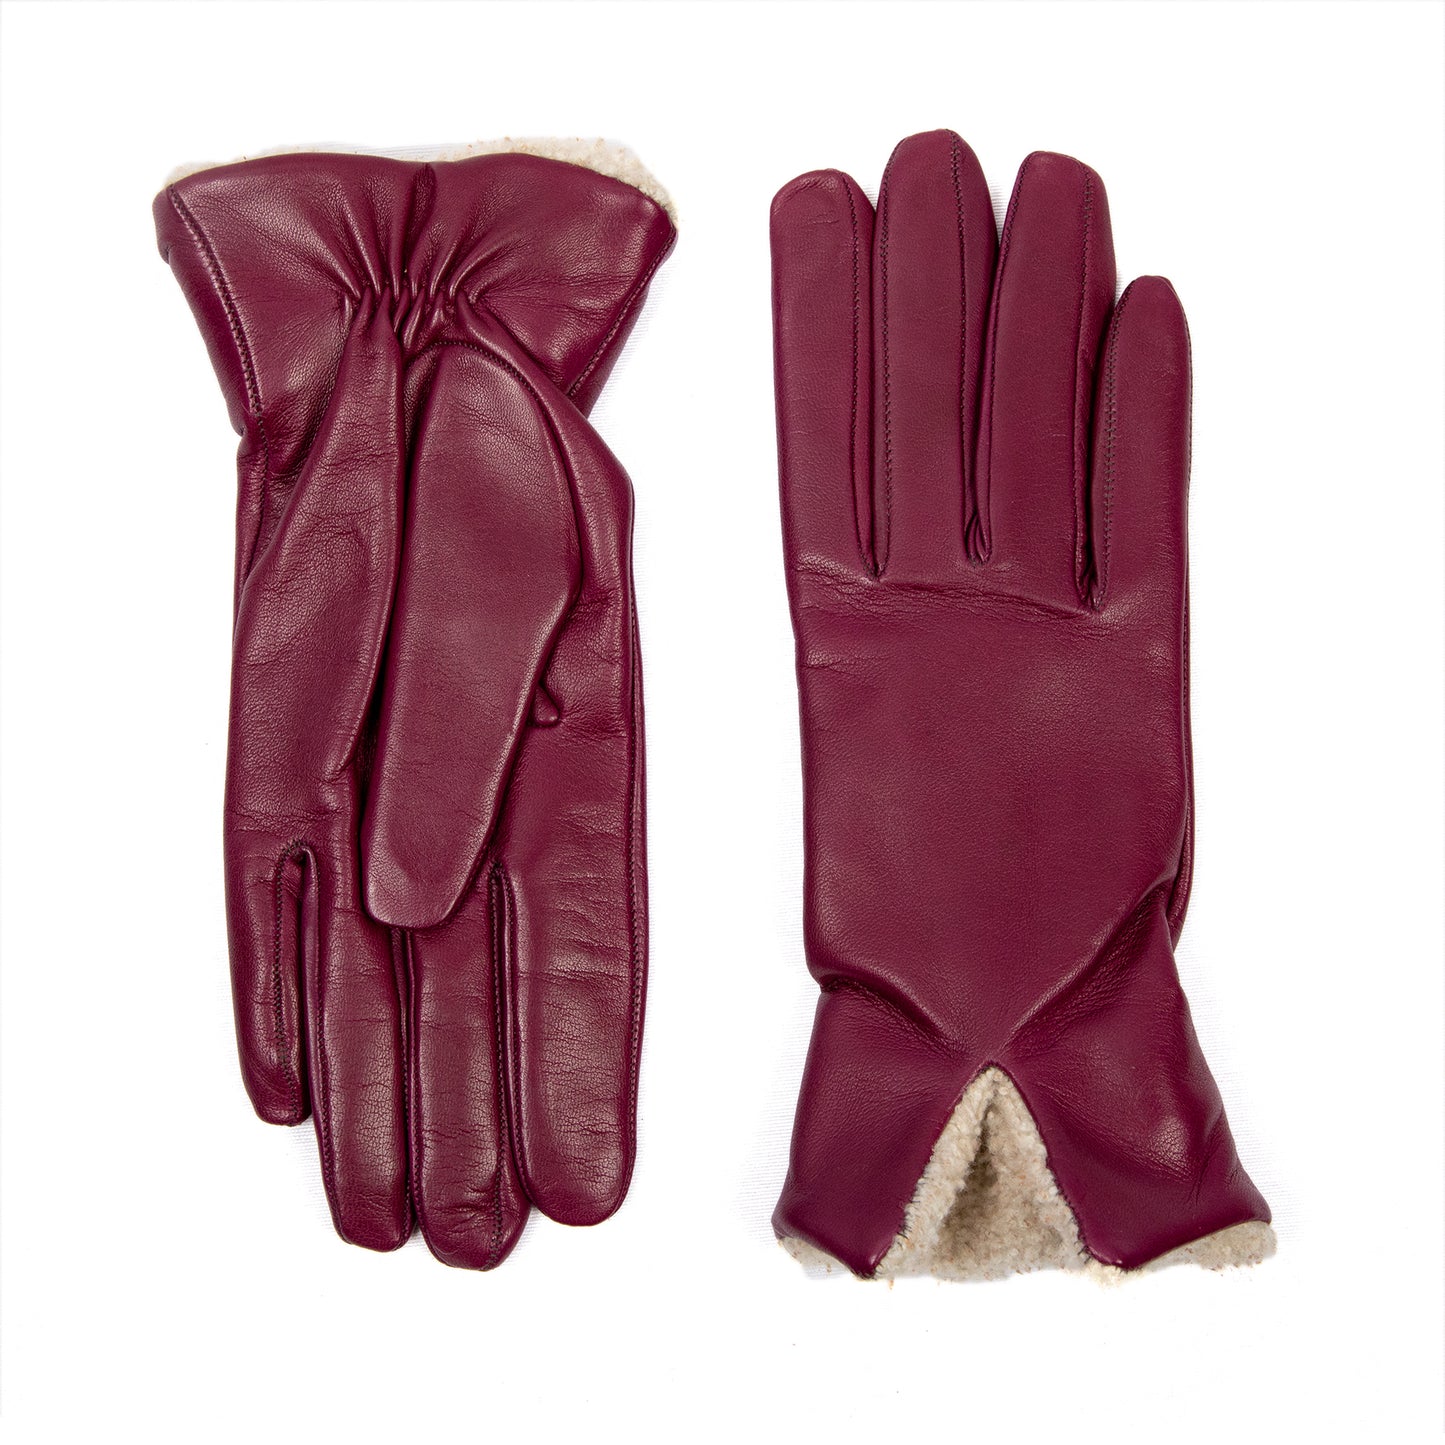 Women's plum nappa leather gloves with shearling cuff